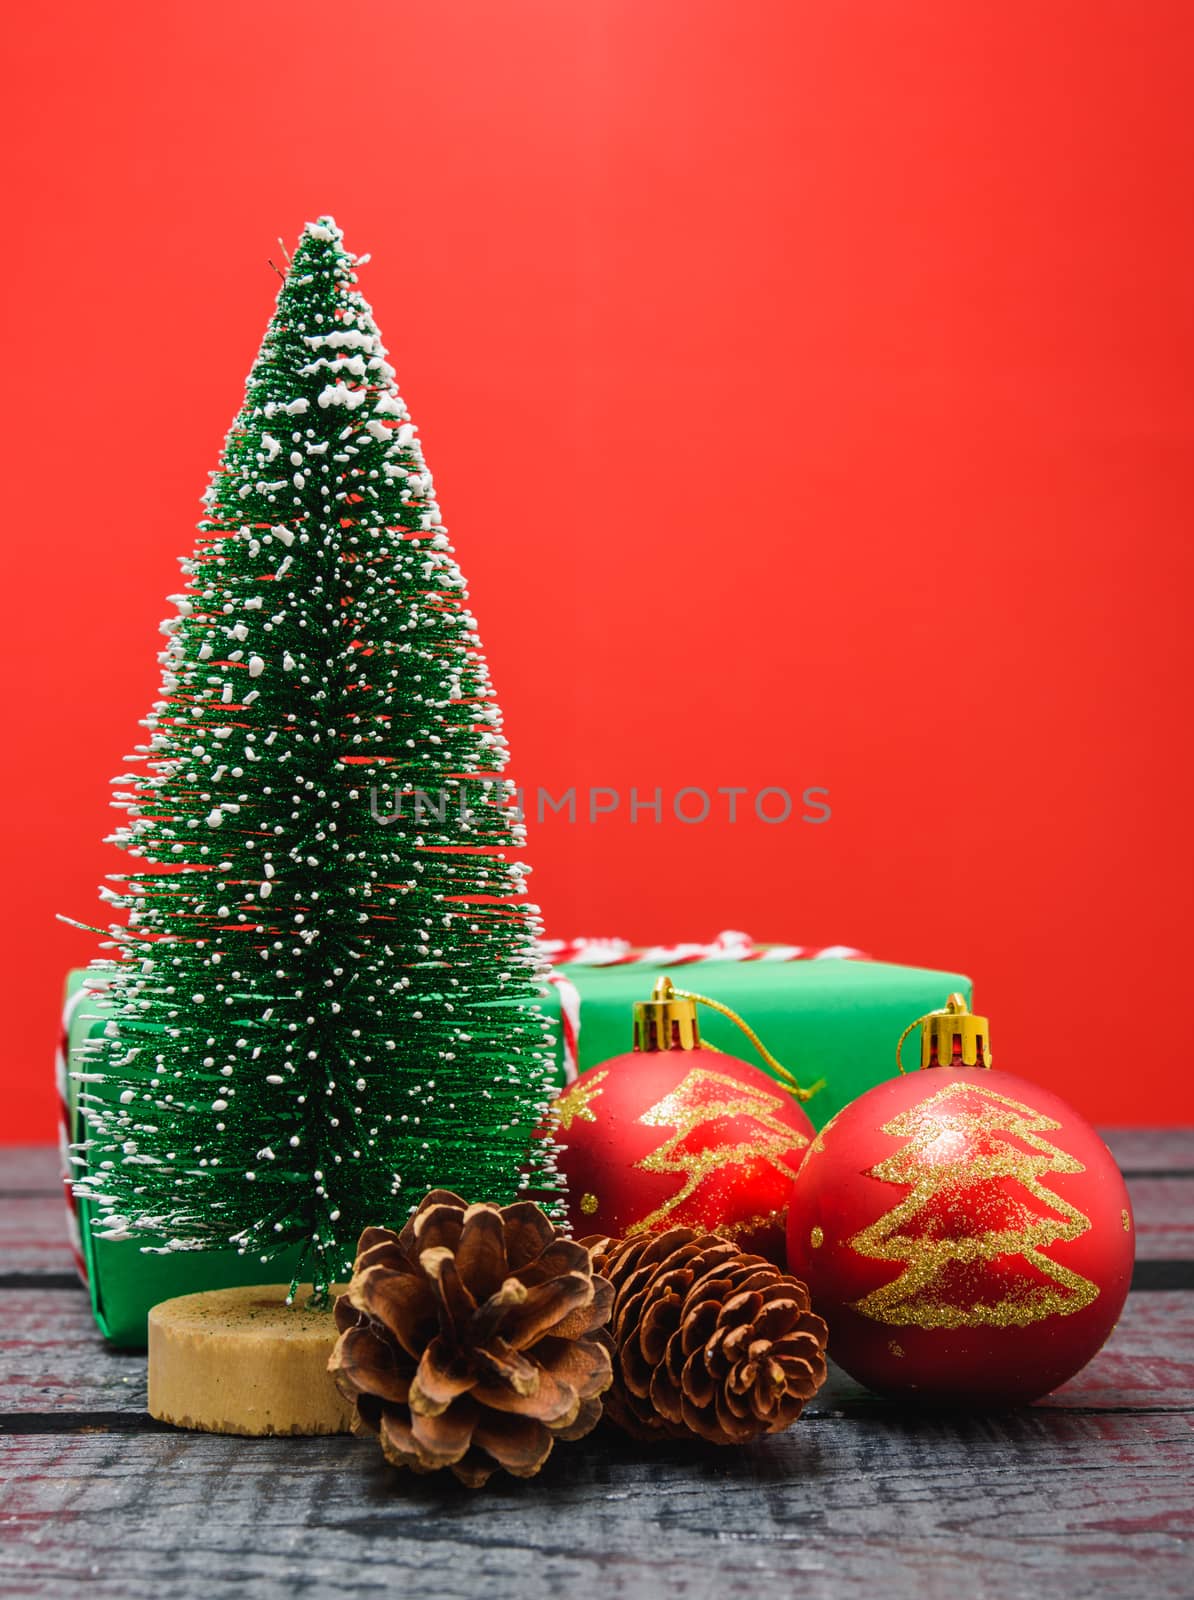 Christmas composition and decorations, minimal green fir tree br by Sorapop